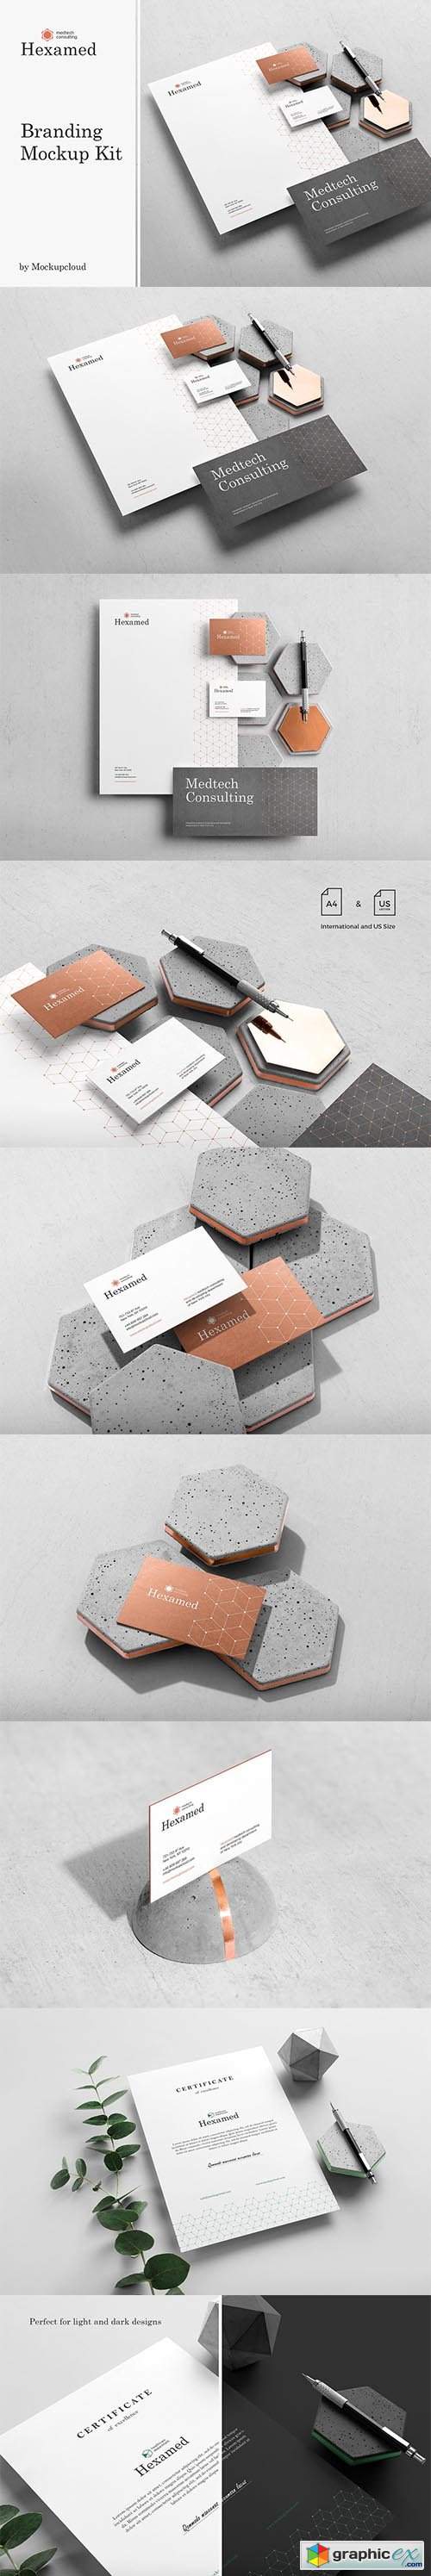 Download Banner & Mockup Template » page 76 » Free Download Vector ...